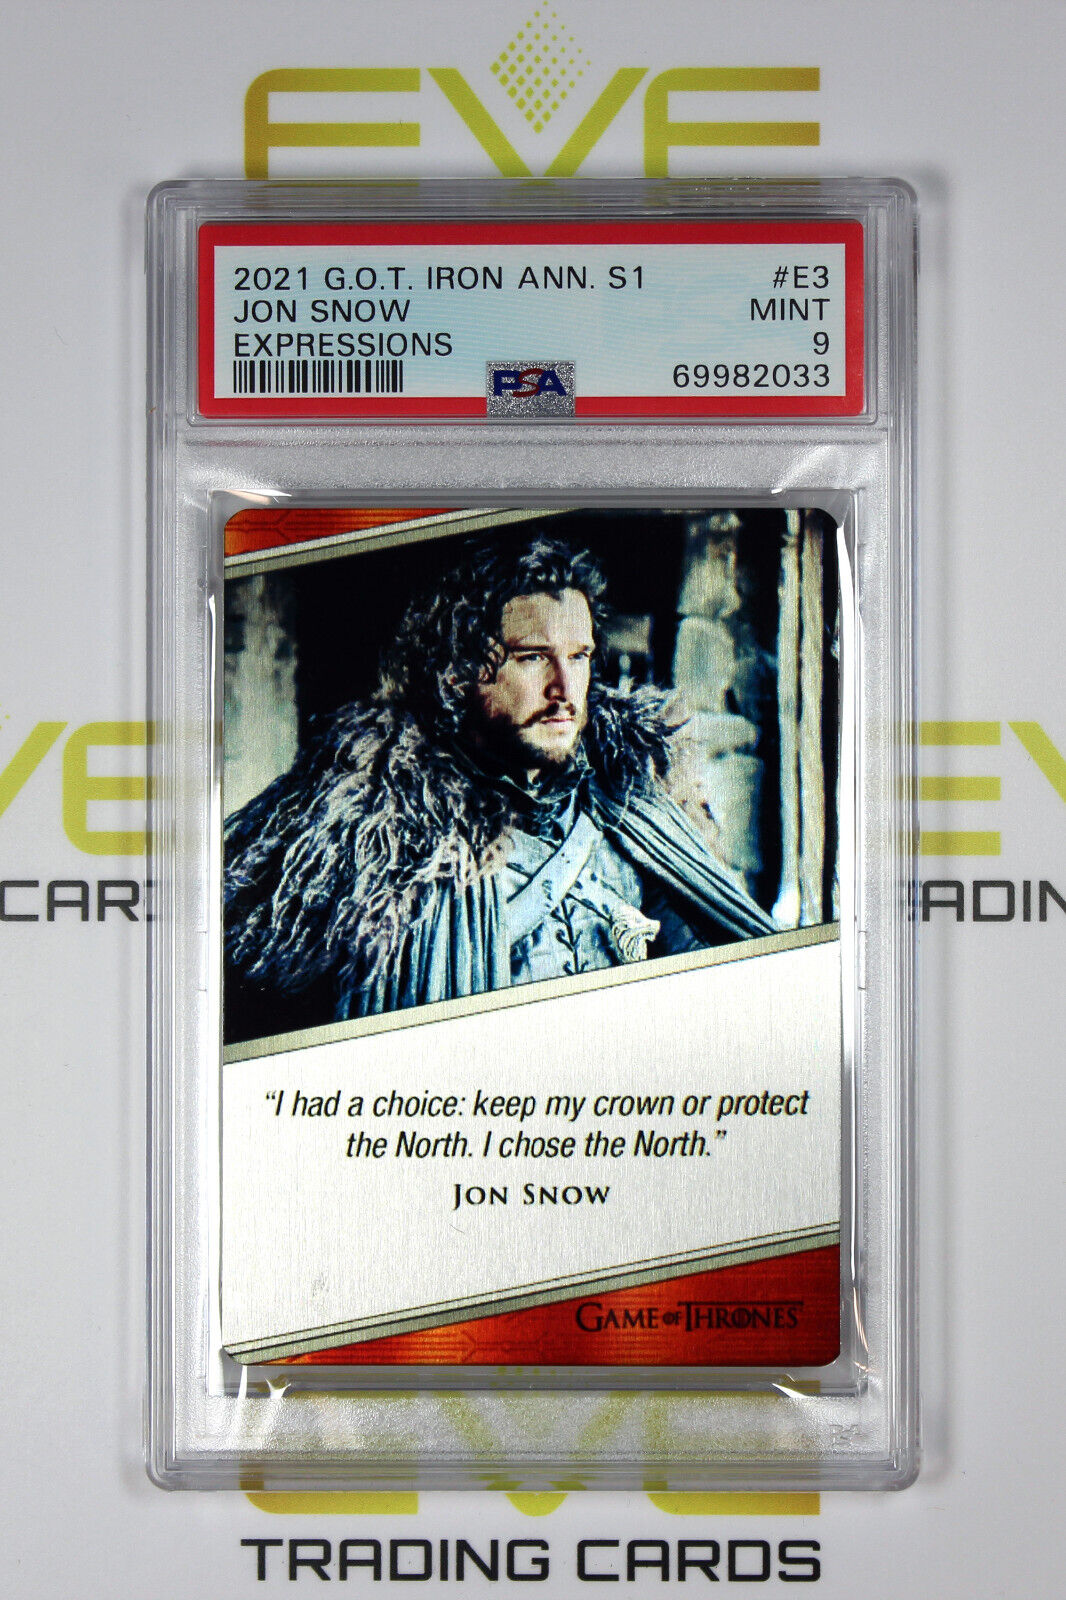 Graded Game of Thrones Card - #E3 2021 Jon Snow - Expressions - PSA 9